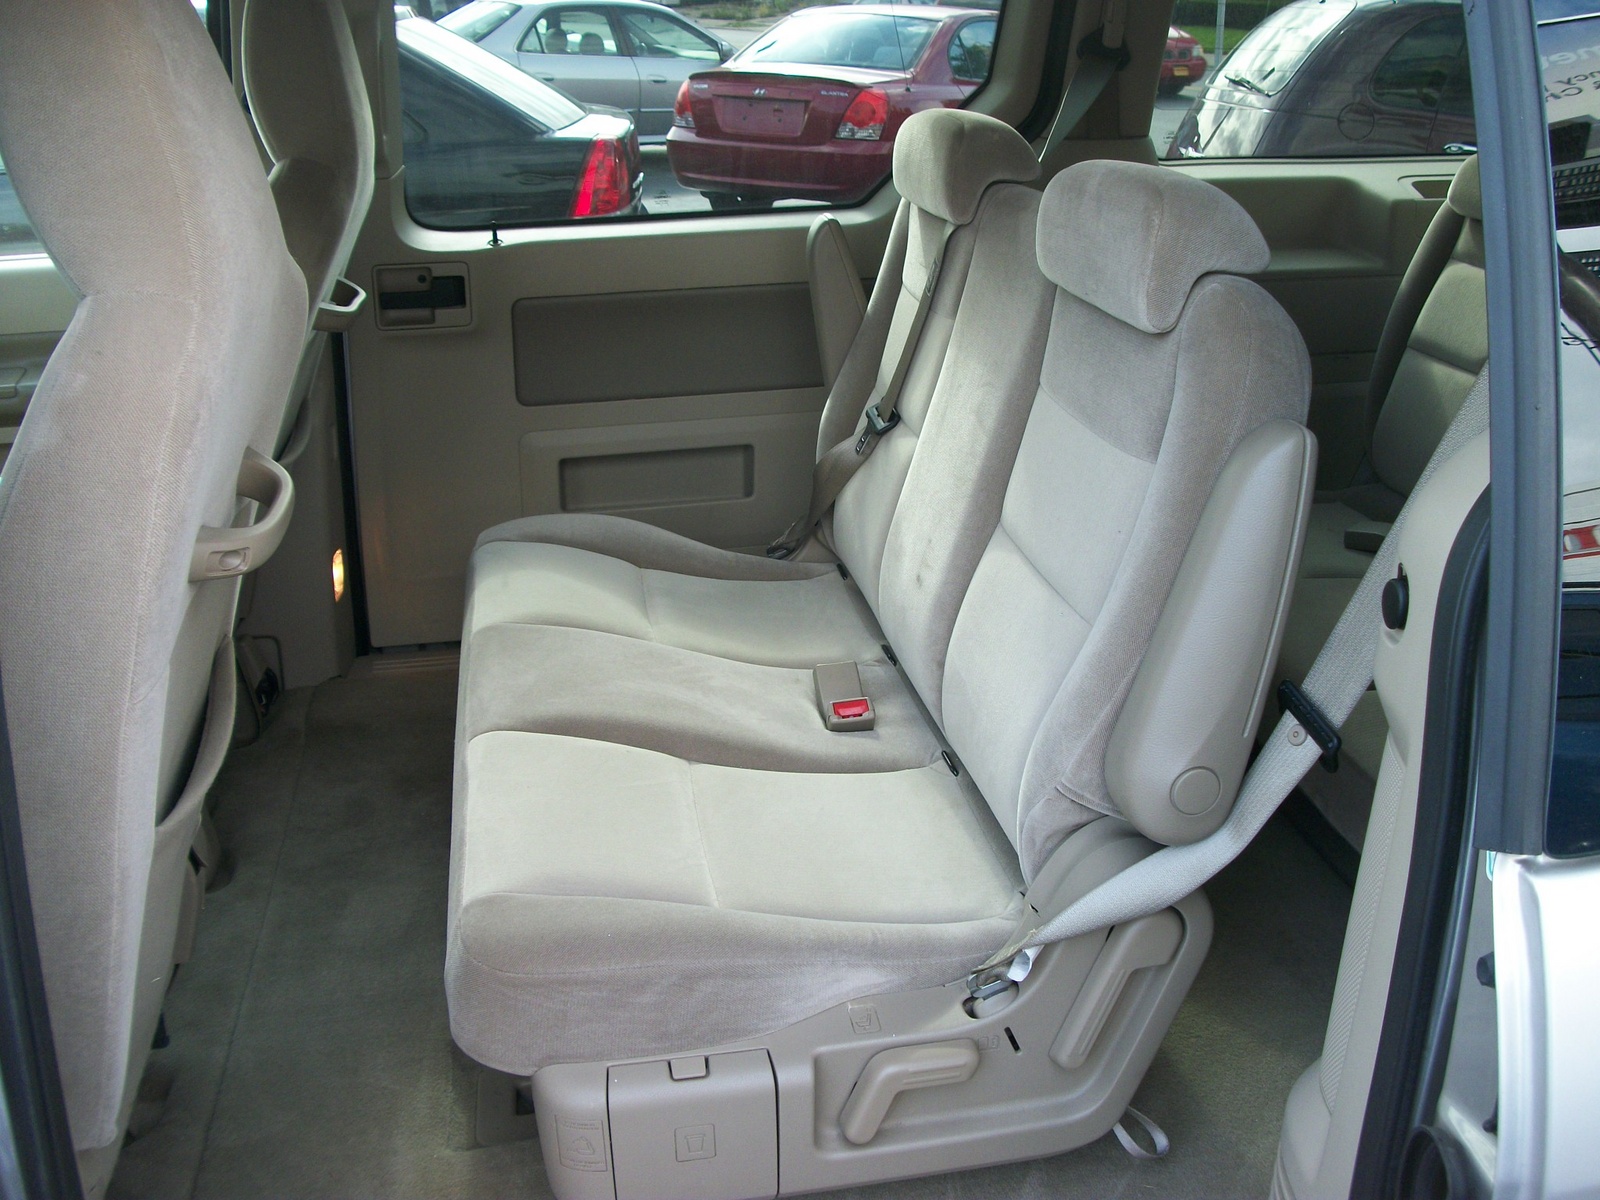 2005 Ford freestar interior pictures